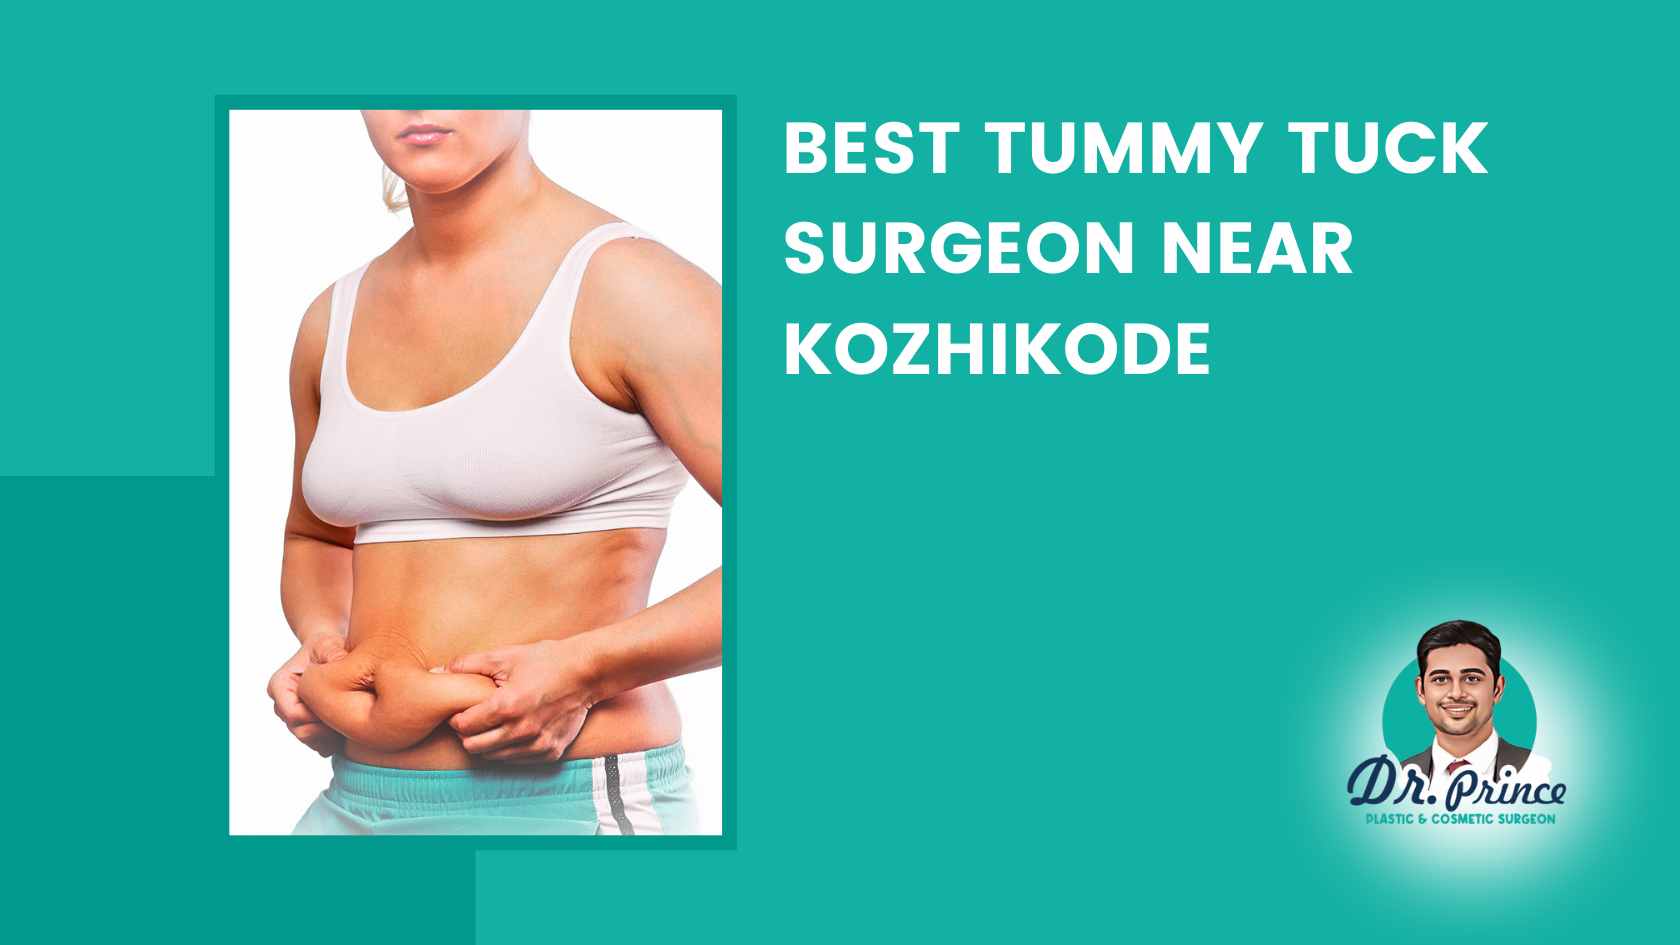 Dr. Prince performing tummy tuck surgery at the Sushrutha Institute of Plastic Surgery.